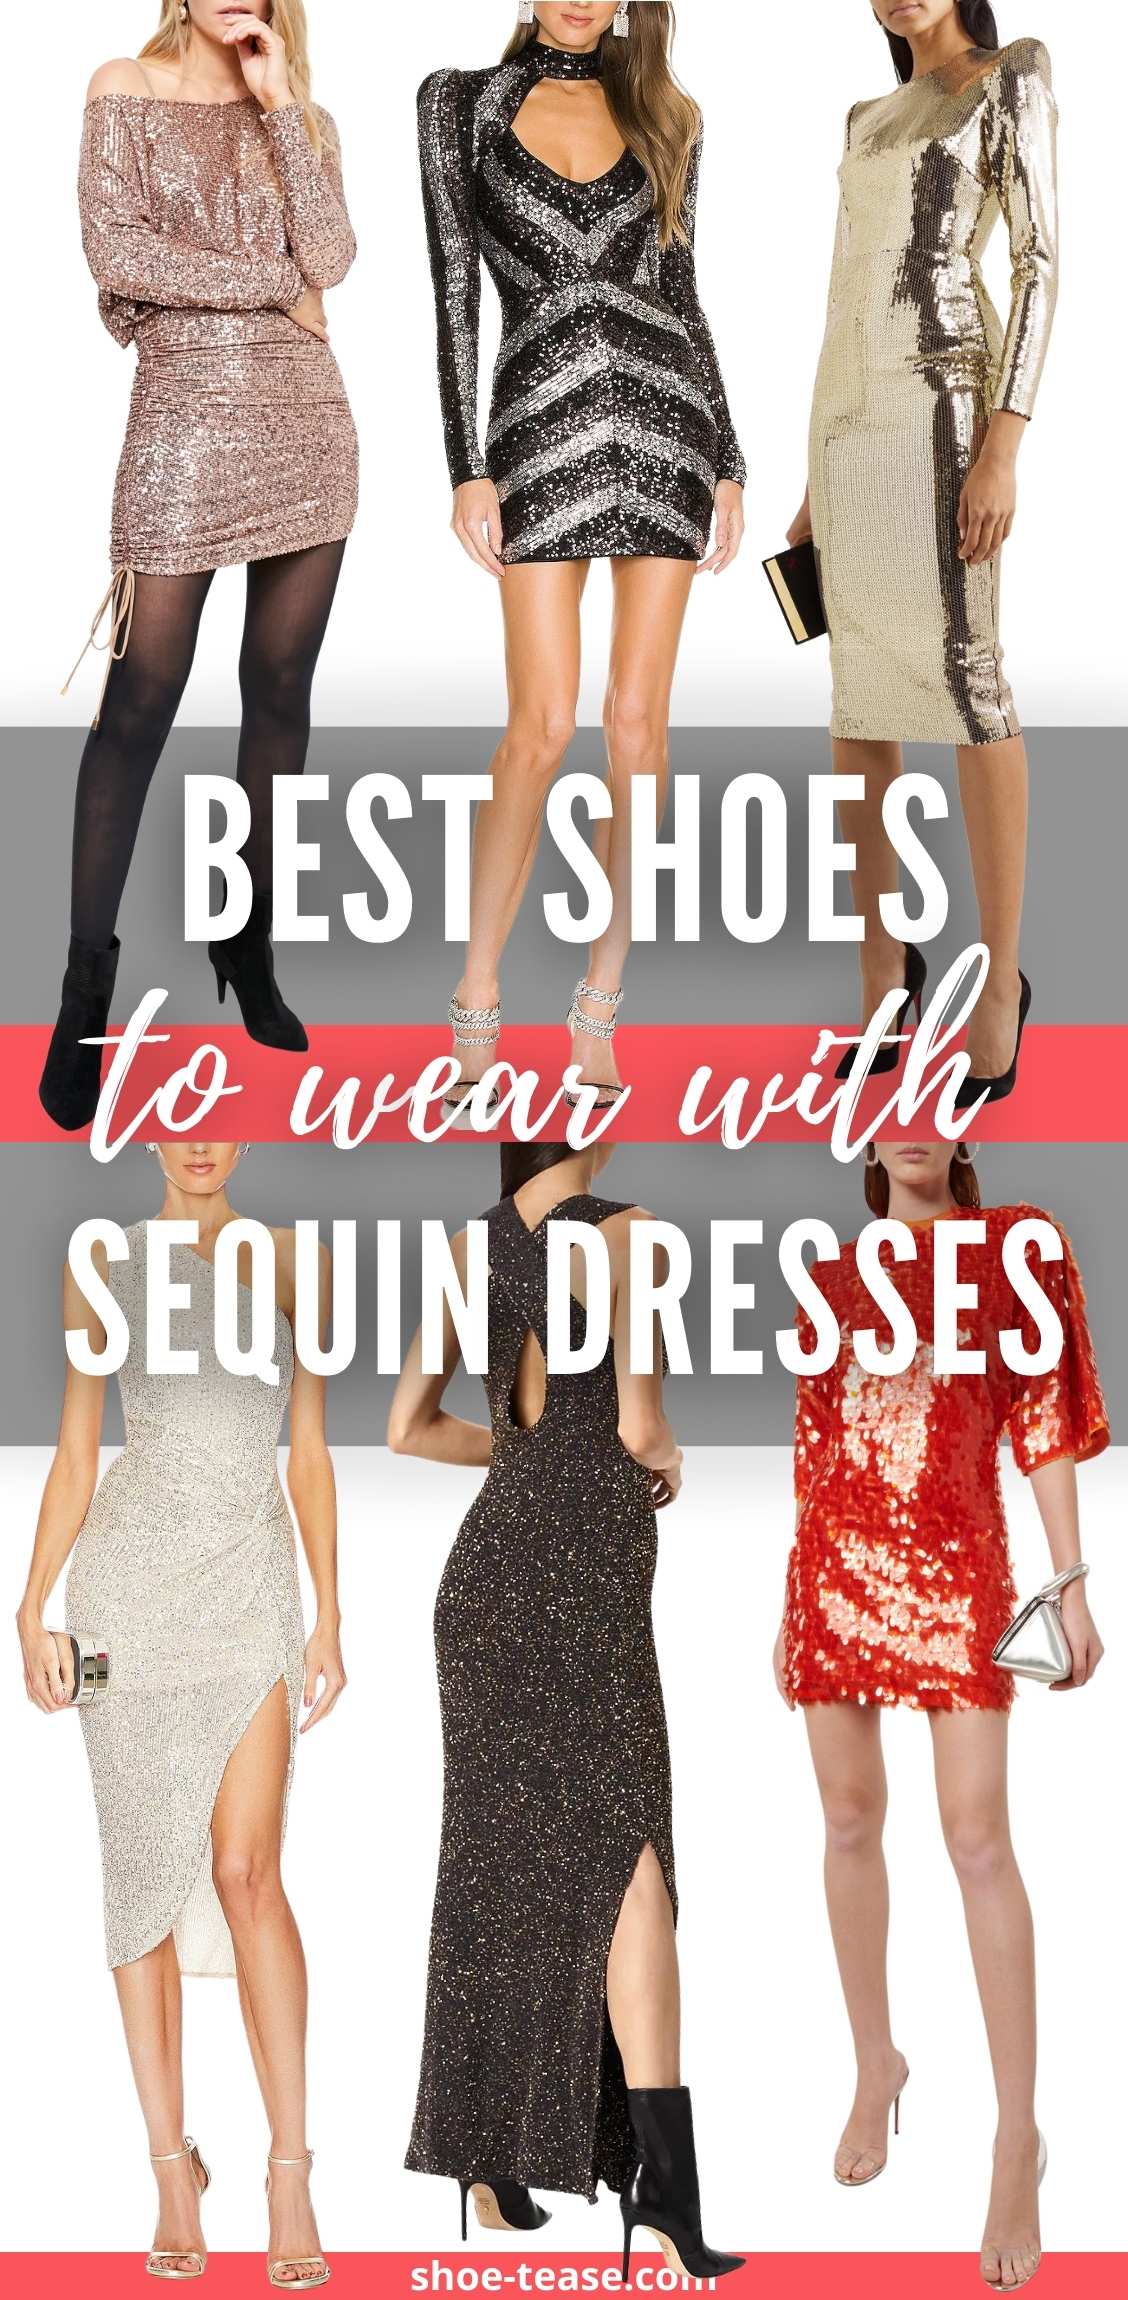 Collage of 6 women wearing different shoes to wear with sequin dresses outfits.